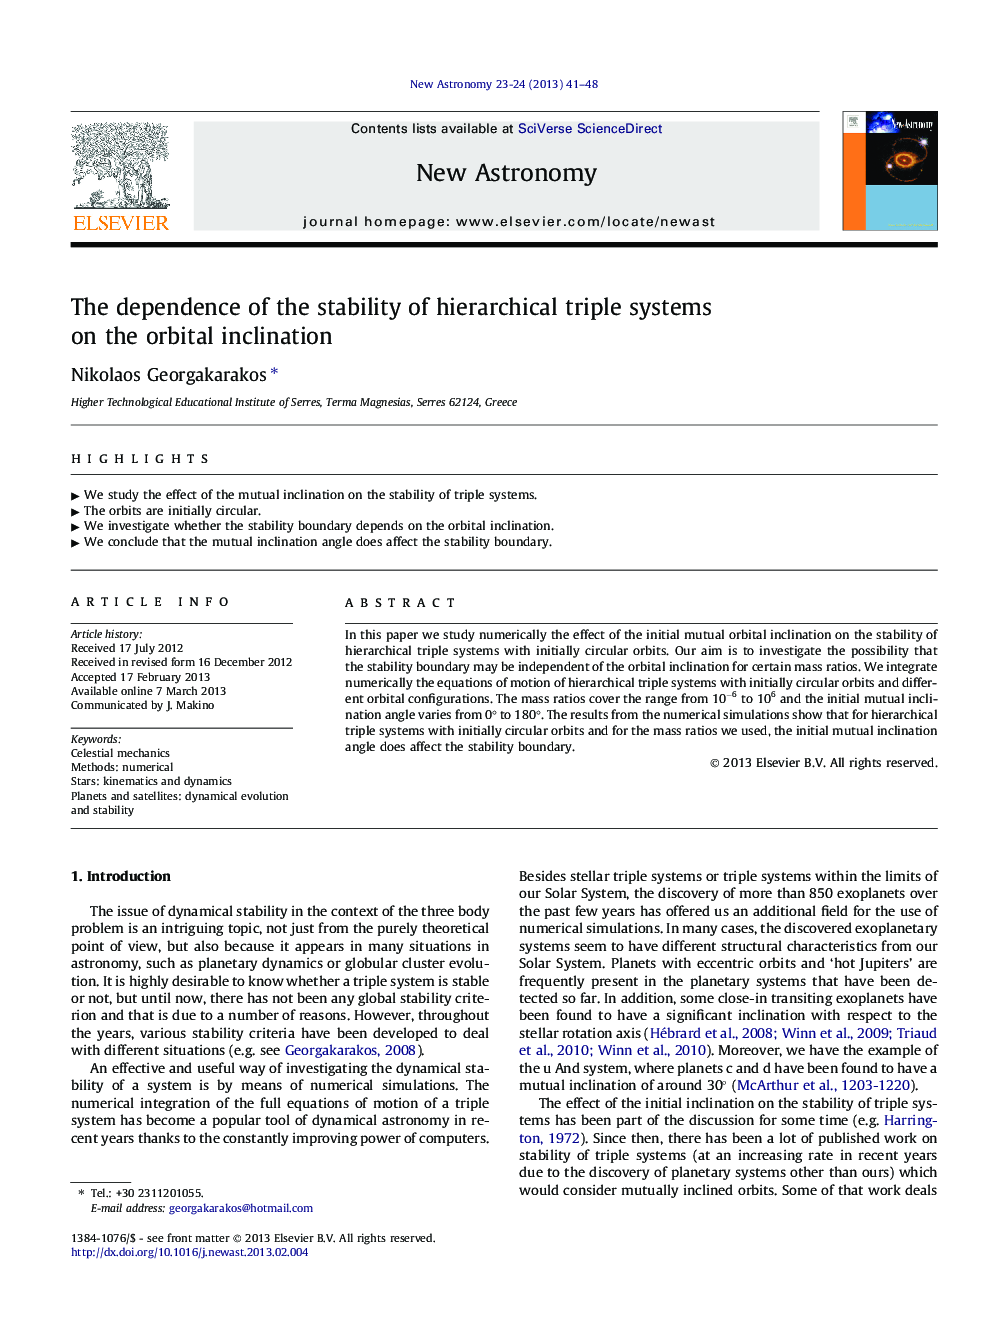 The dependence of the stability of hierarchical triple systems on the orbital inclination